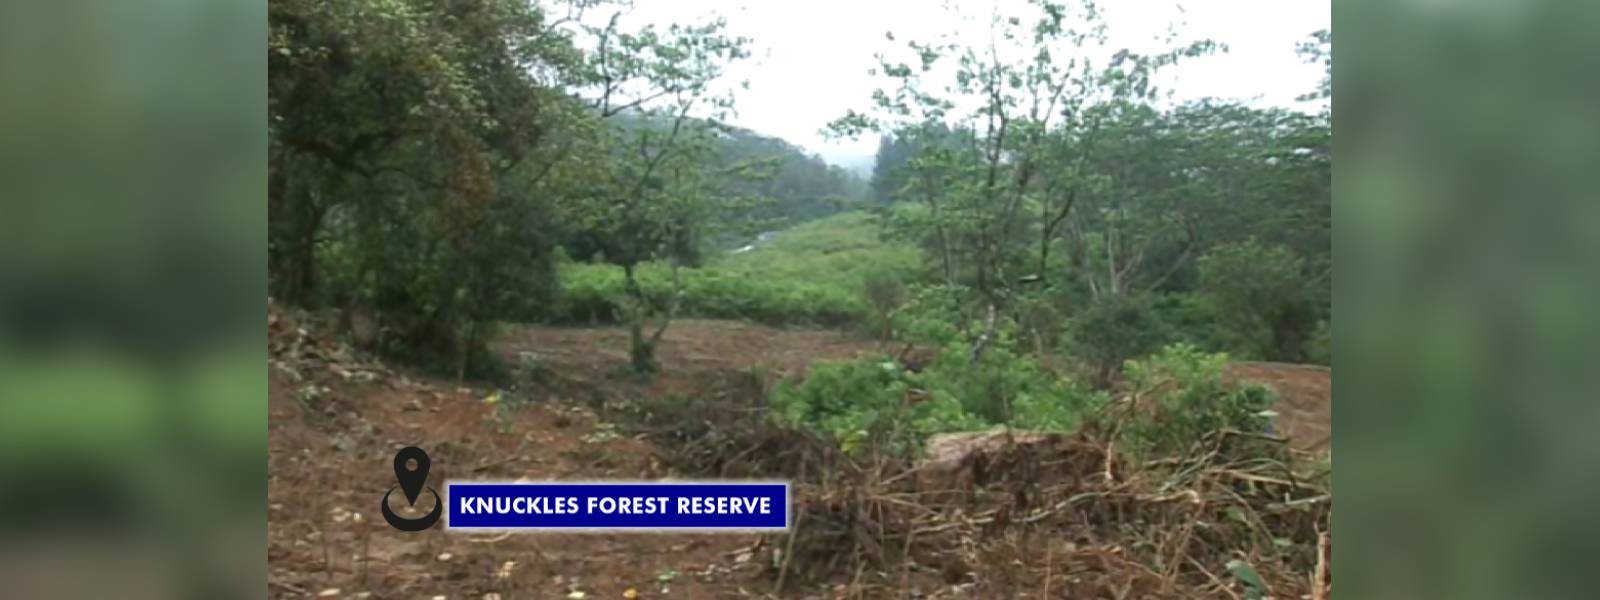 Land area in Knuckles forest reserve cleared 